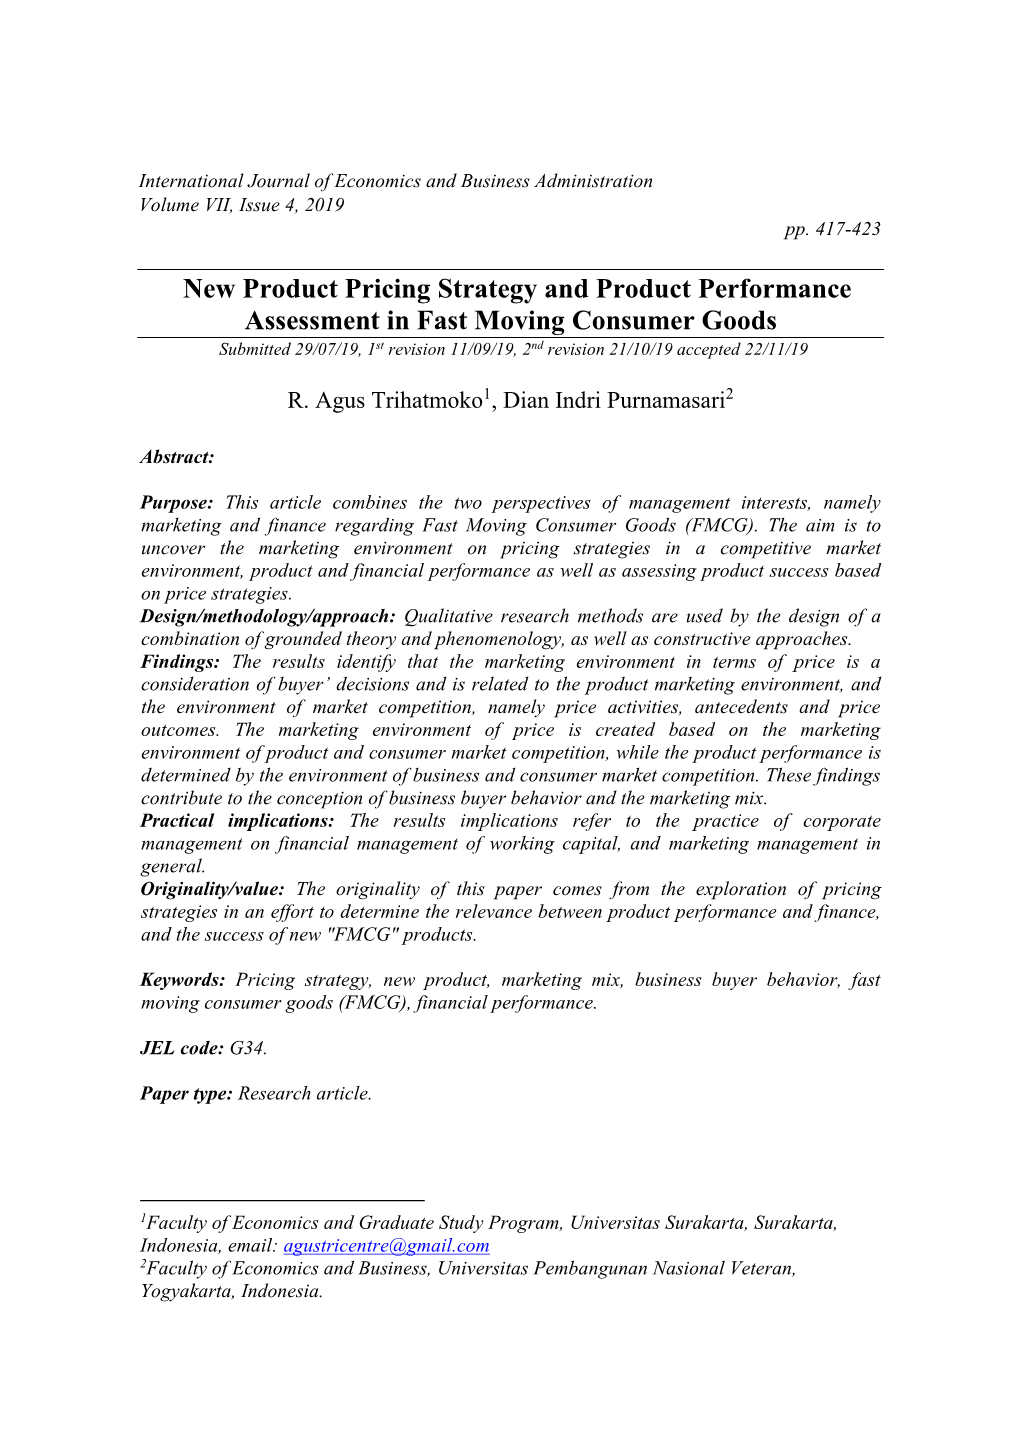 New Product Pricing Strategy and Product Performance Assessment